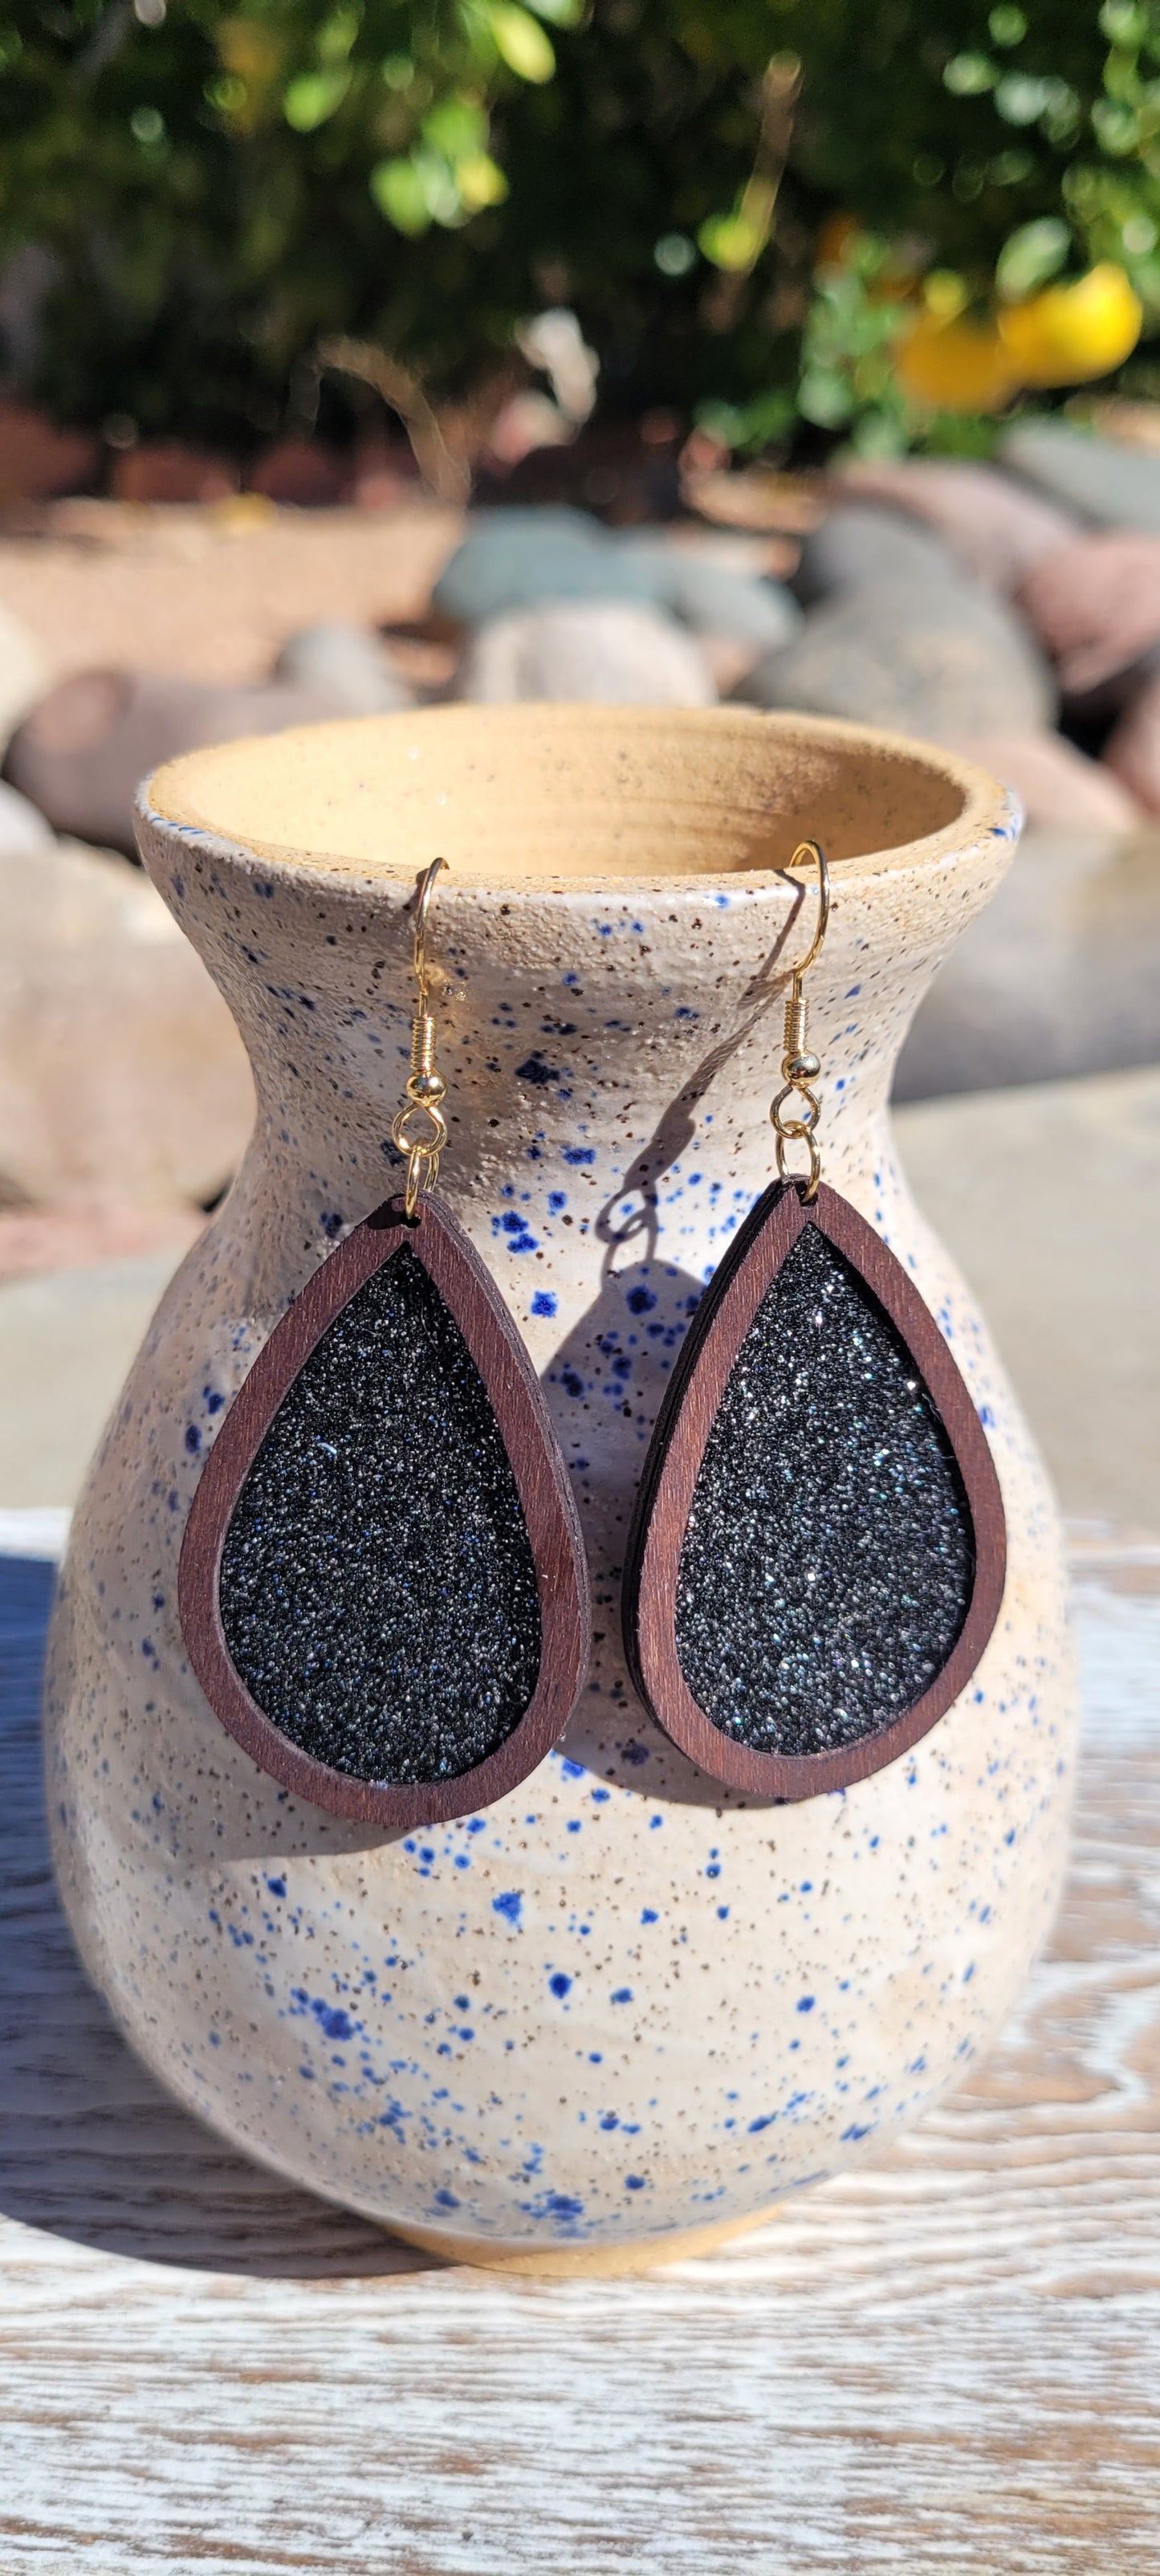 Dark brown wood Black glitter Teardrop shape Brushed gold fish hook dangle earrings Rubber earring back Length 2”, width 1.33” Whether you want to be on the wild side or classy this earring set it will add a fun touch to your outfit